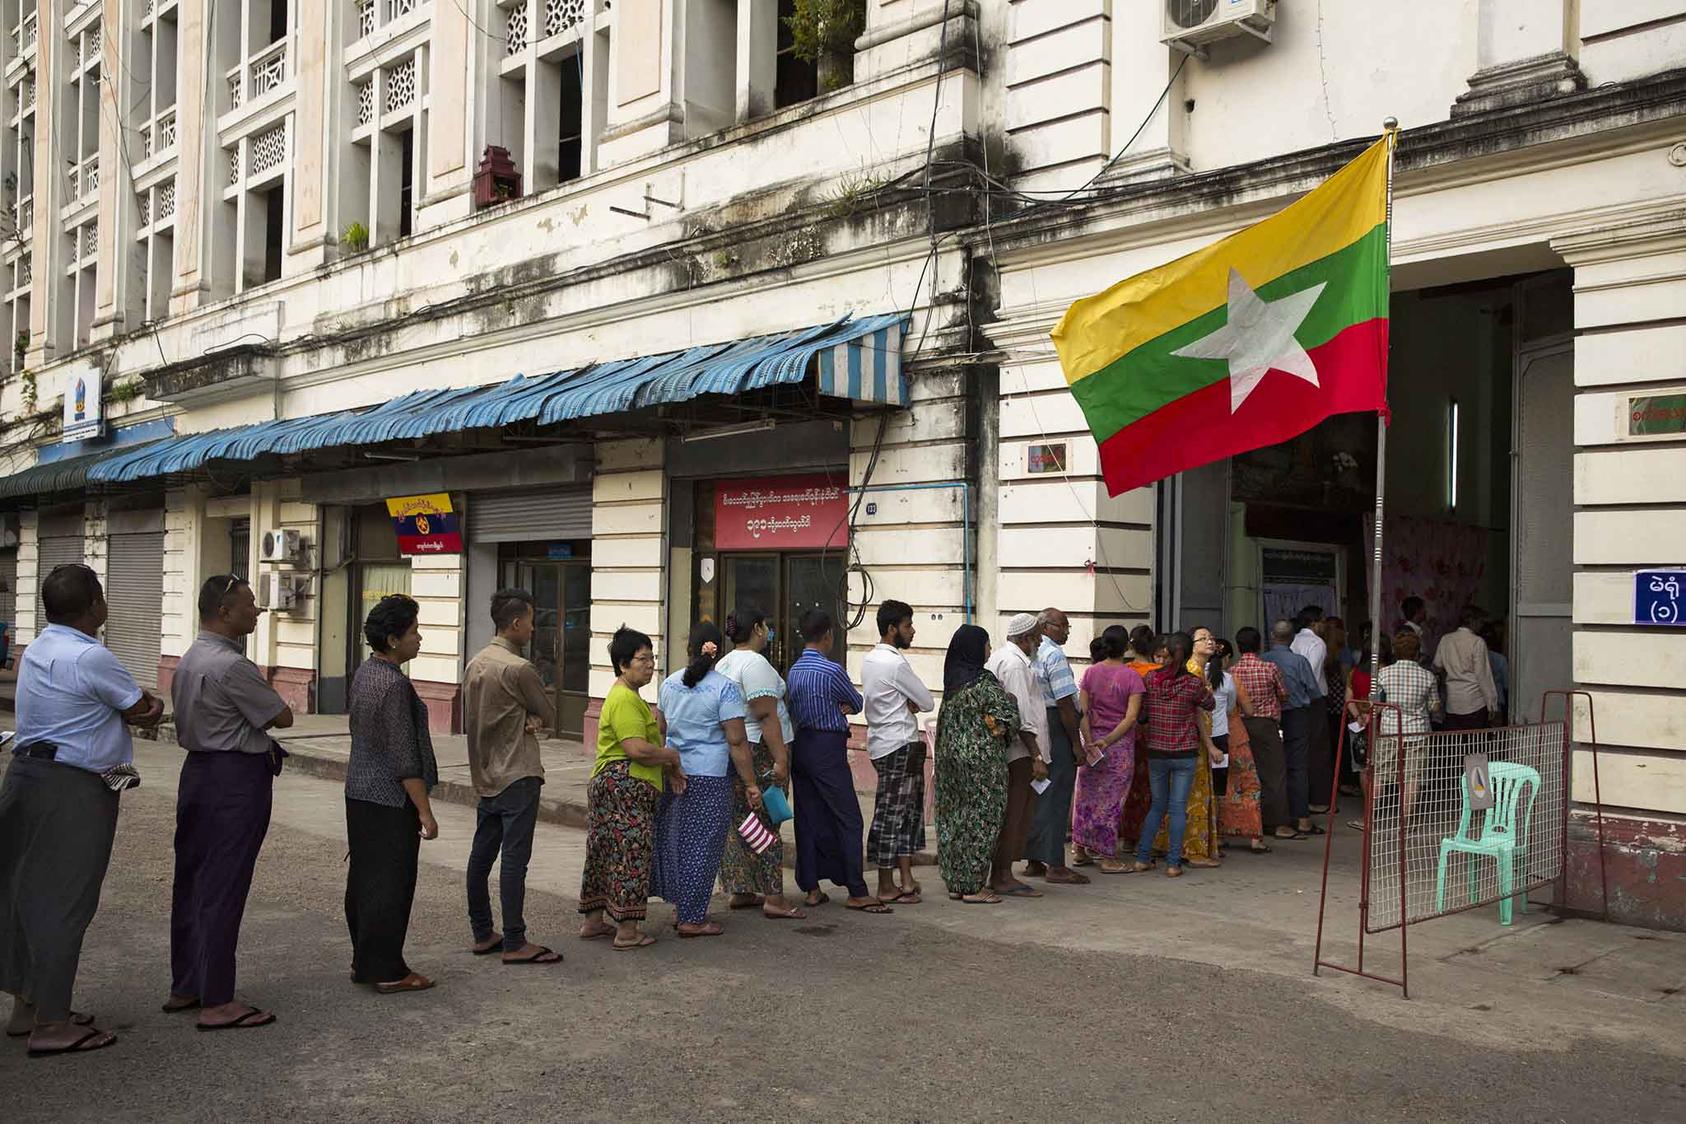 Citizens line up outside a polling station in Yangon to vote in the historic 2015 elections. (Adam Dean/The New York Times)